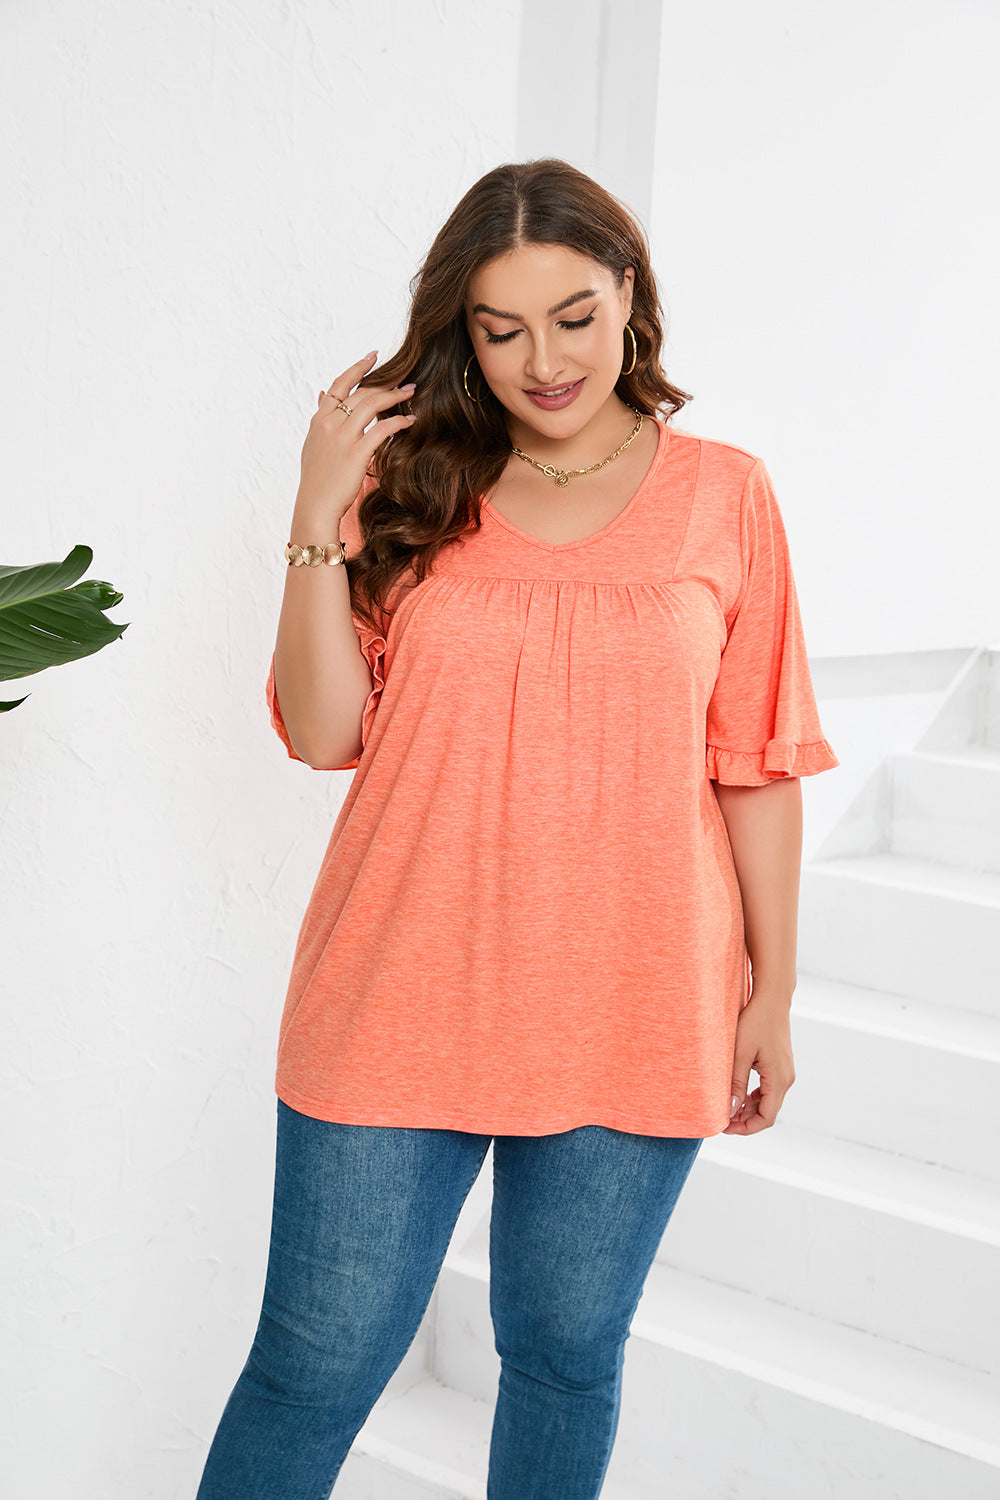 Plus Size Summer Casual V Neck T Shirt Pleated Loose Lotus Leaf Loose Top Women